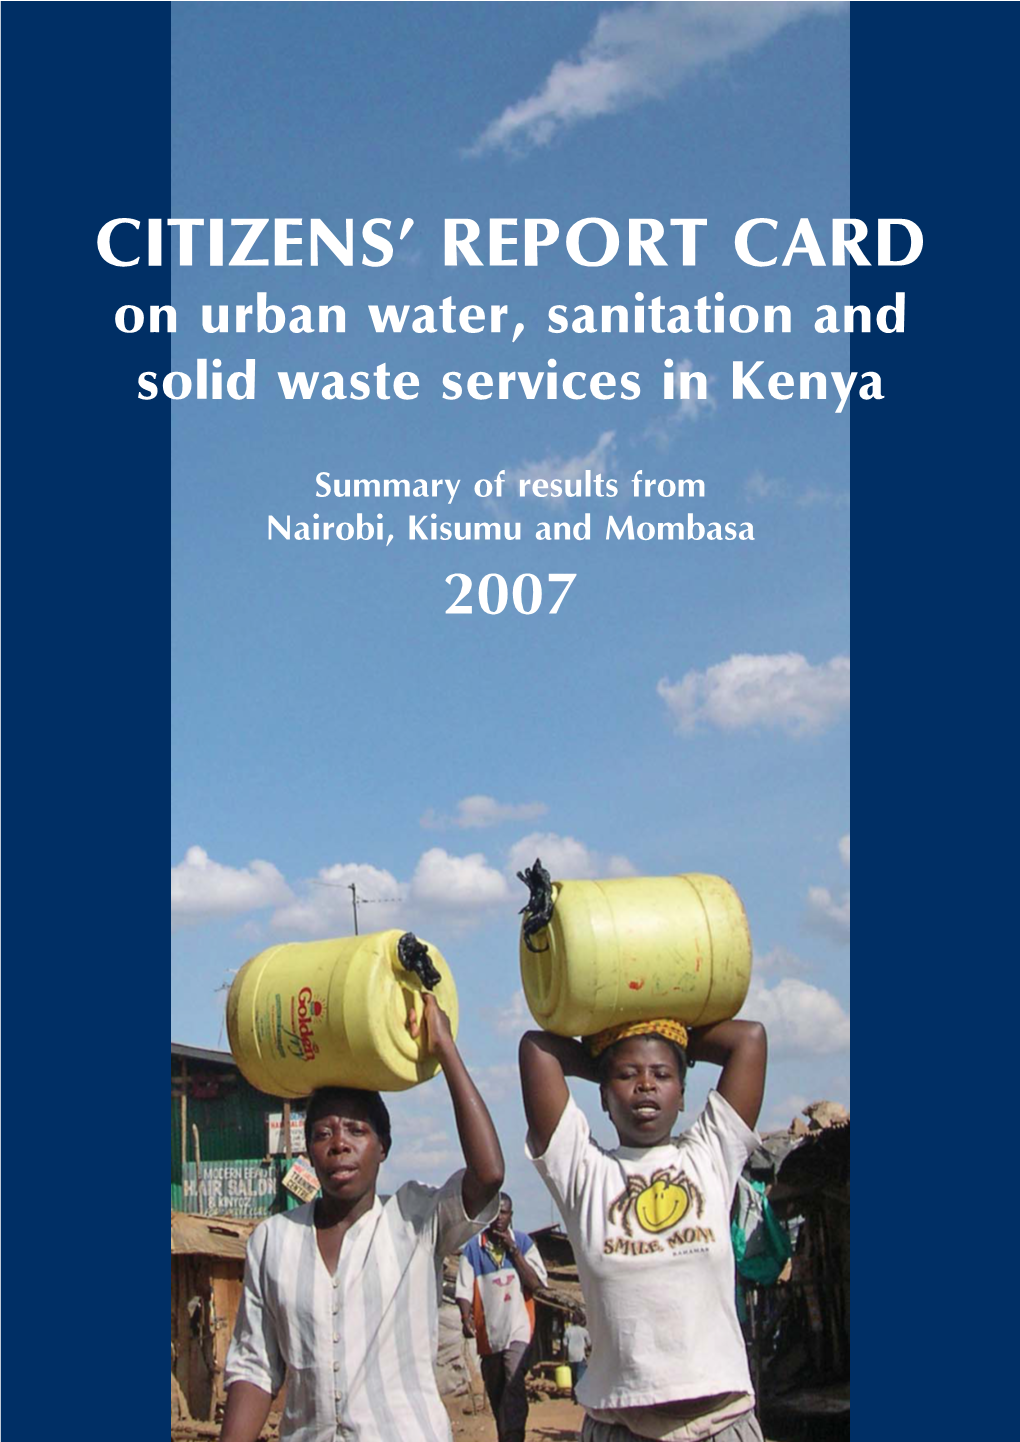 Citizens' Report Card on Urban Water, Sanitation and Solid Waste